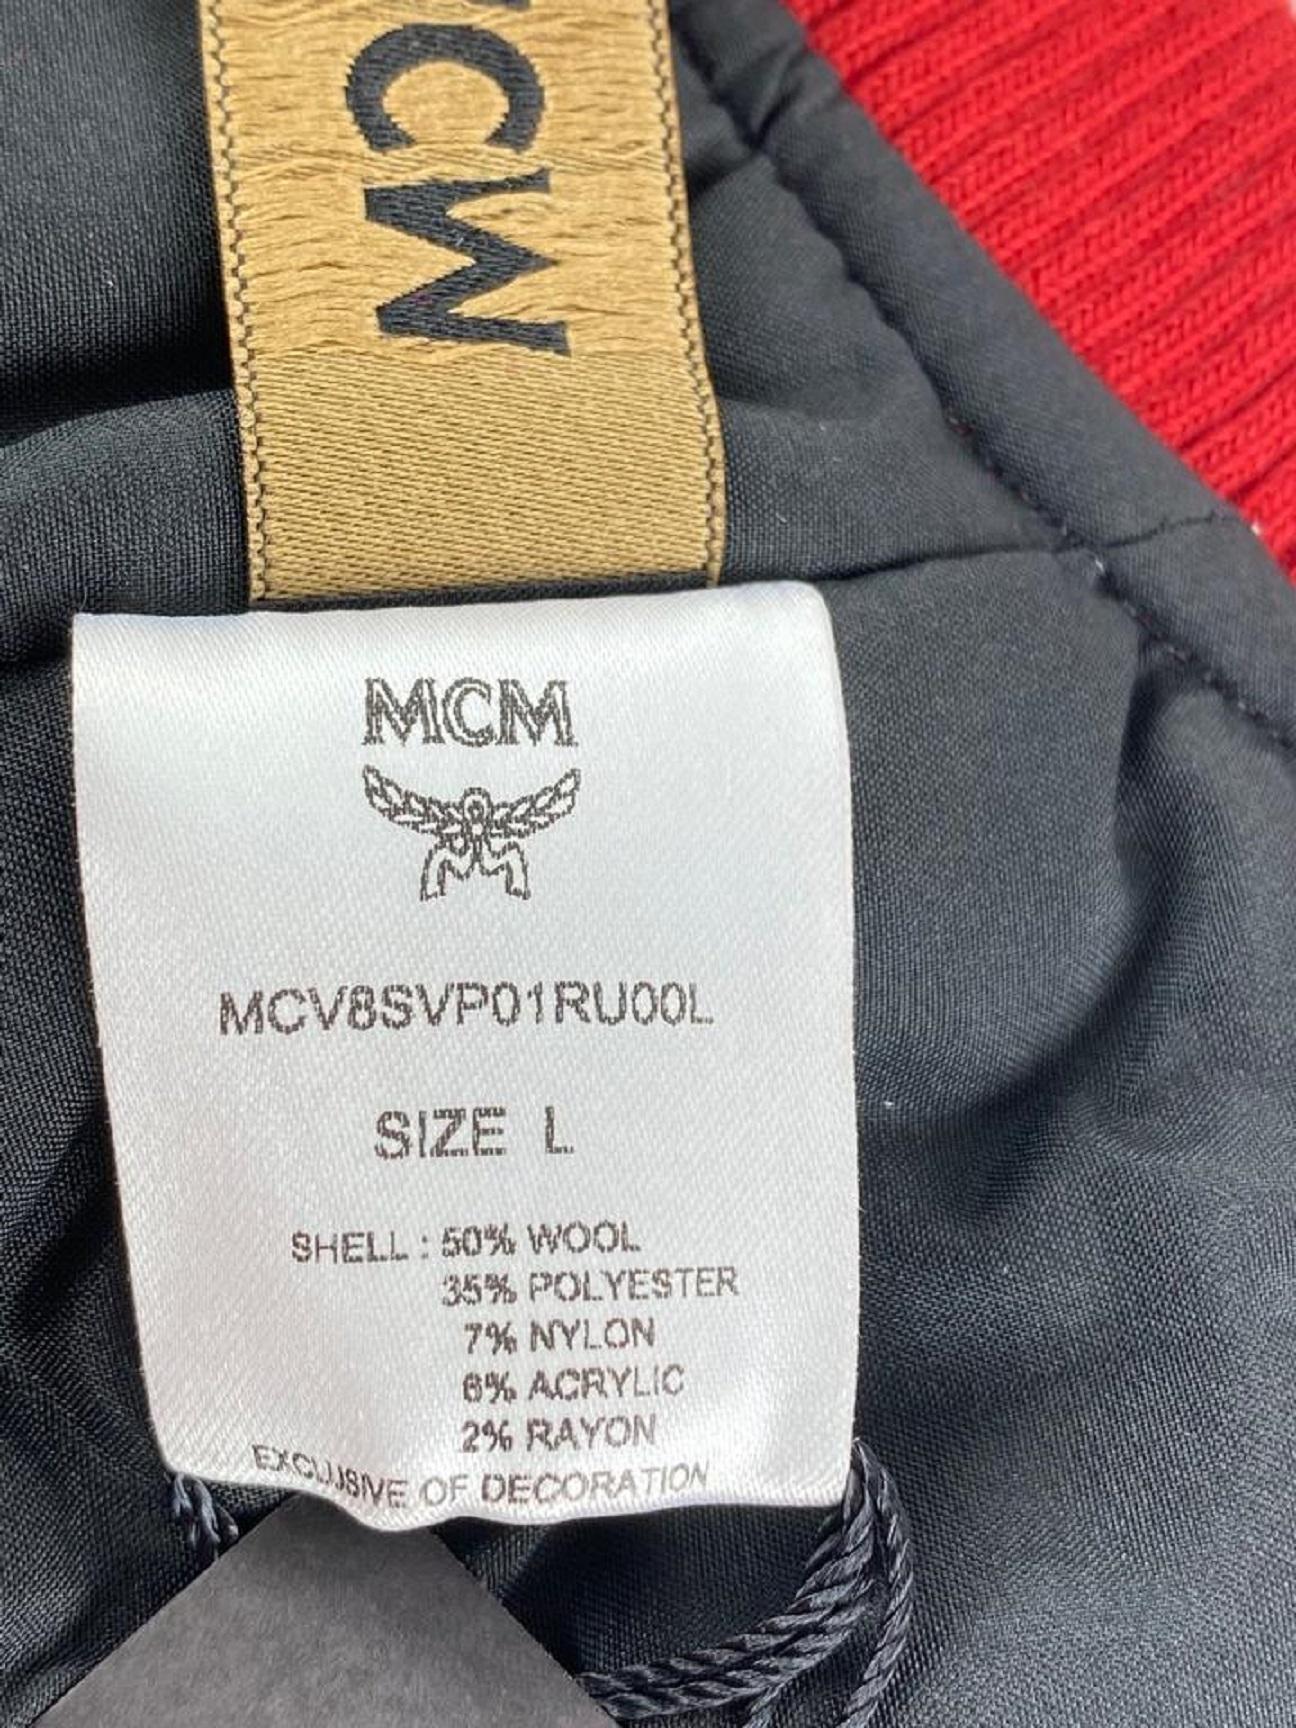 MCM Varsity Jacket Visetos Logo Sweater Dog Shirt Puppy Cat Pig 2mcm1231 In New Condition For Sale In Dix hills, NY